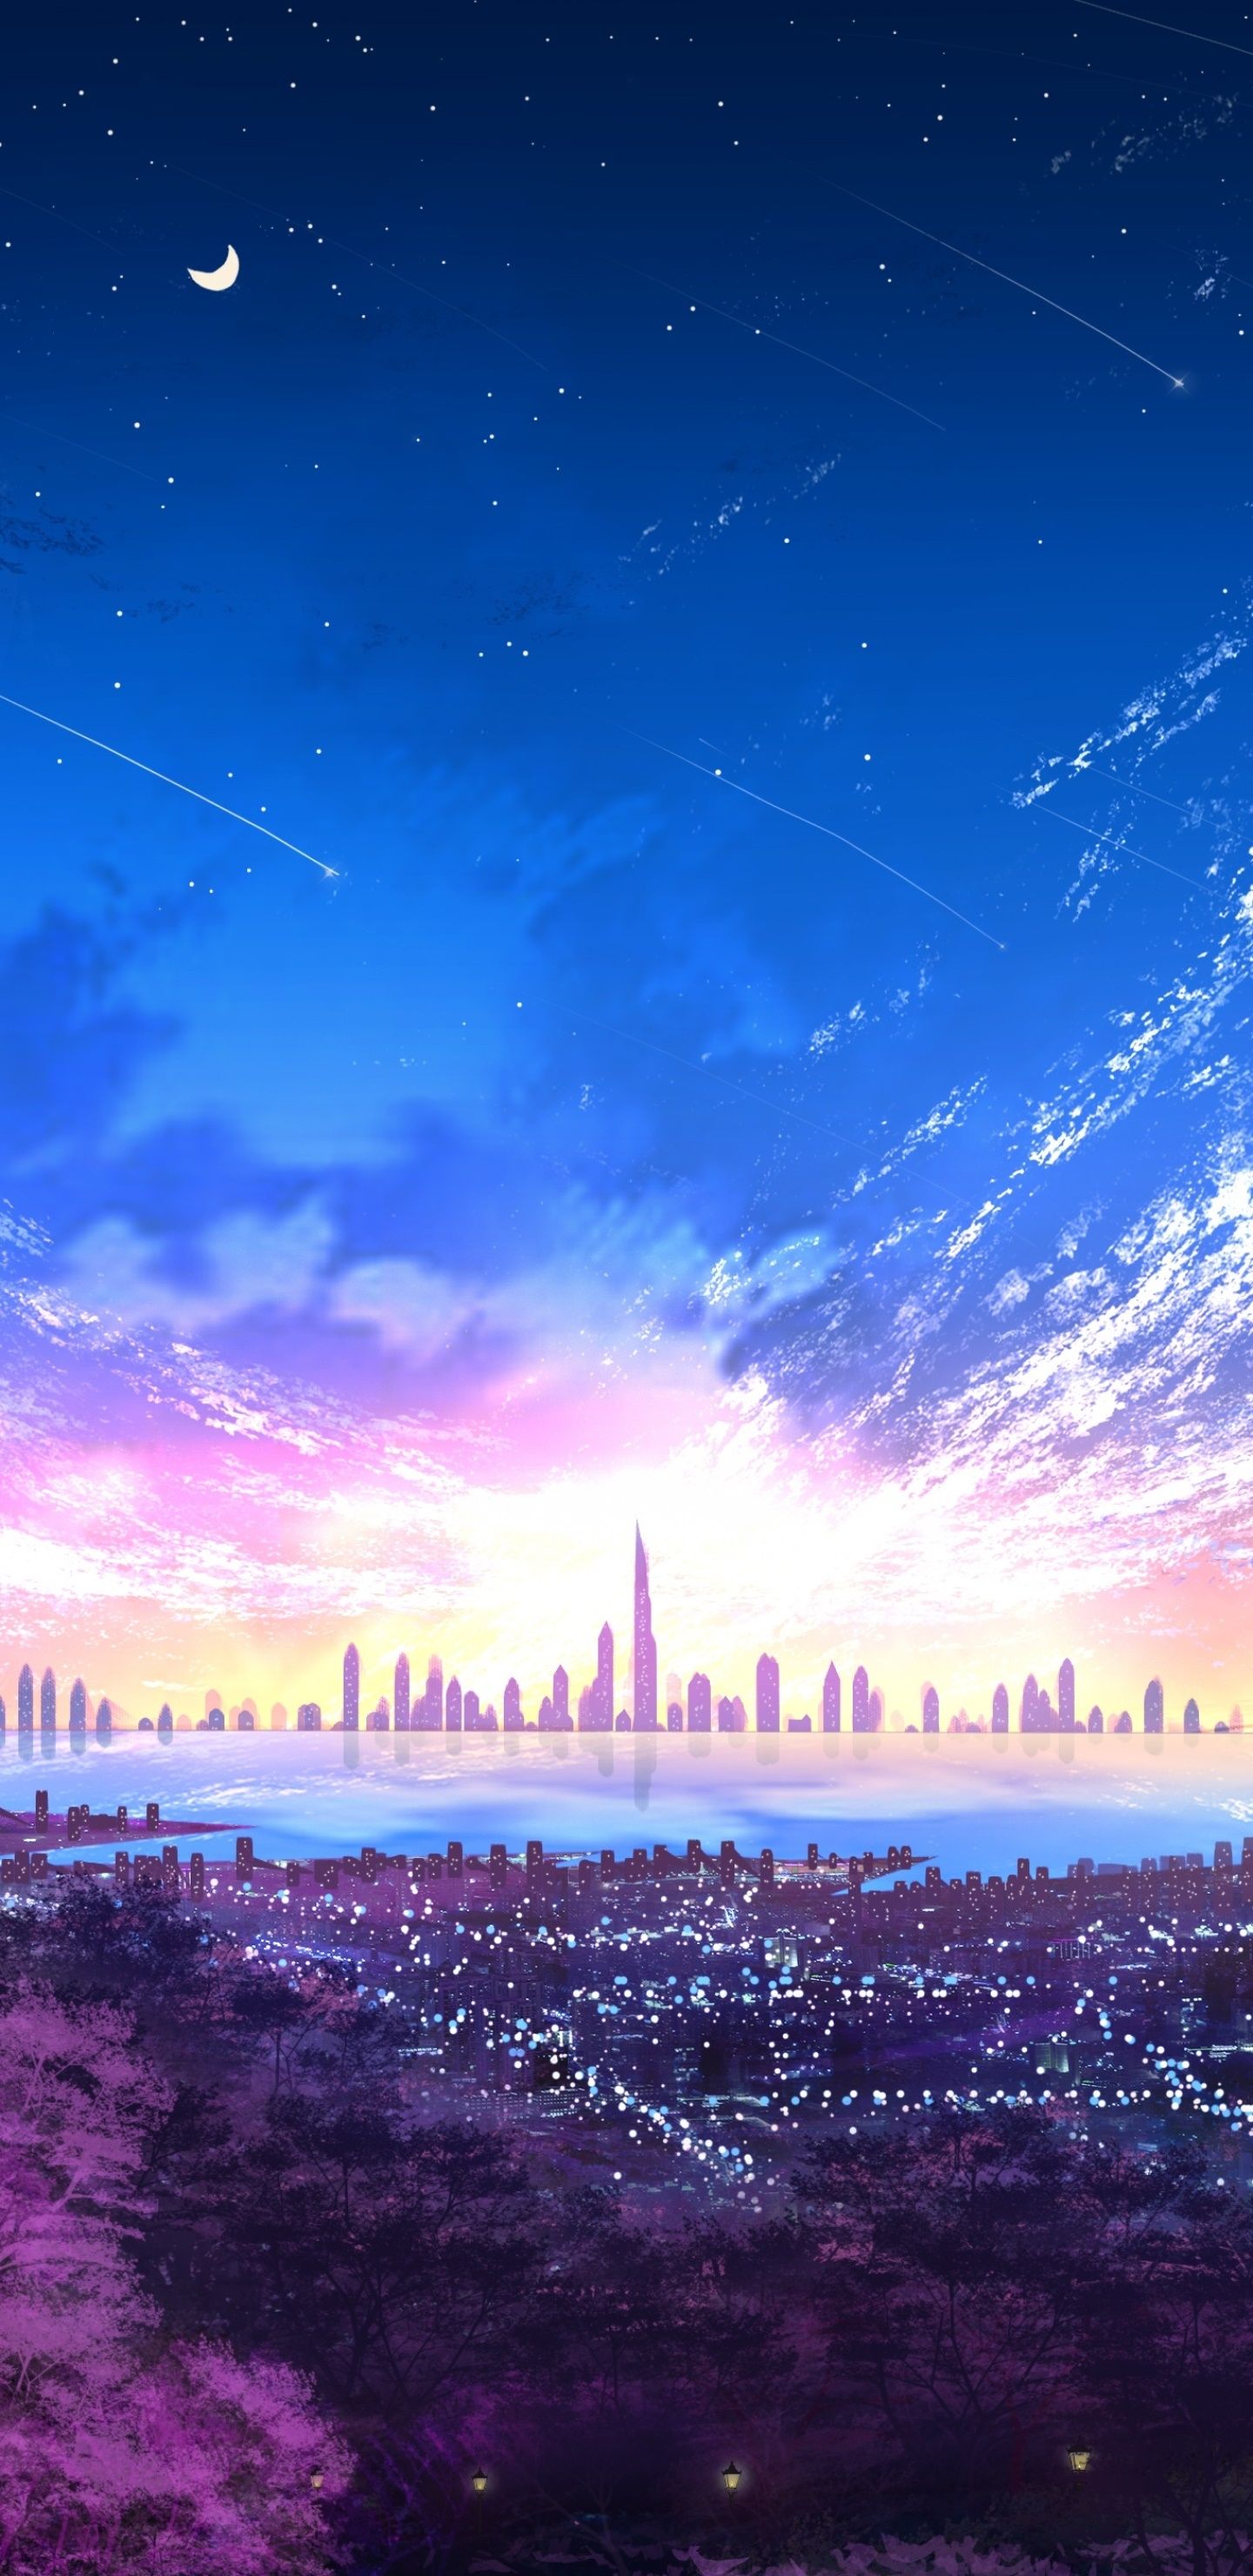 Anime cityscape wallpaper for your phone - Anime city